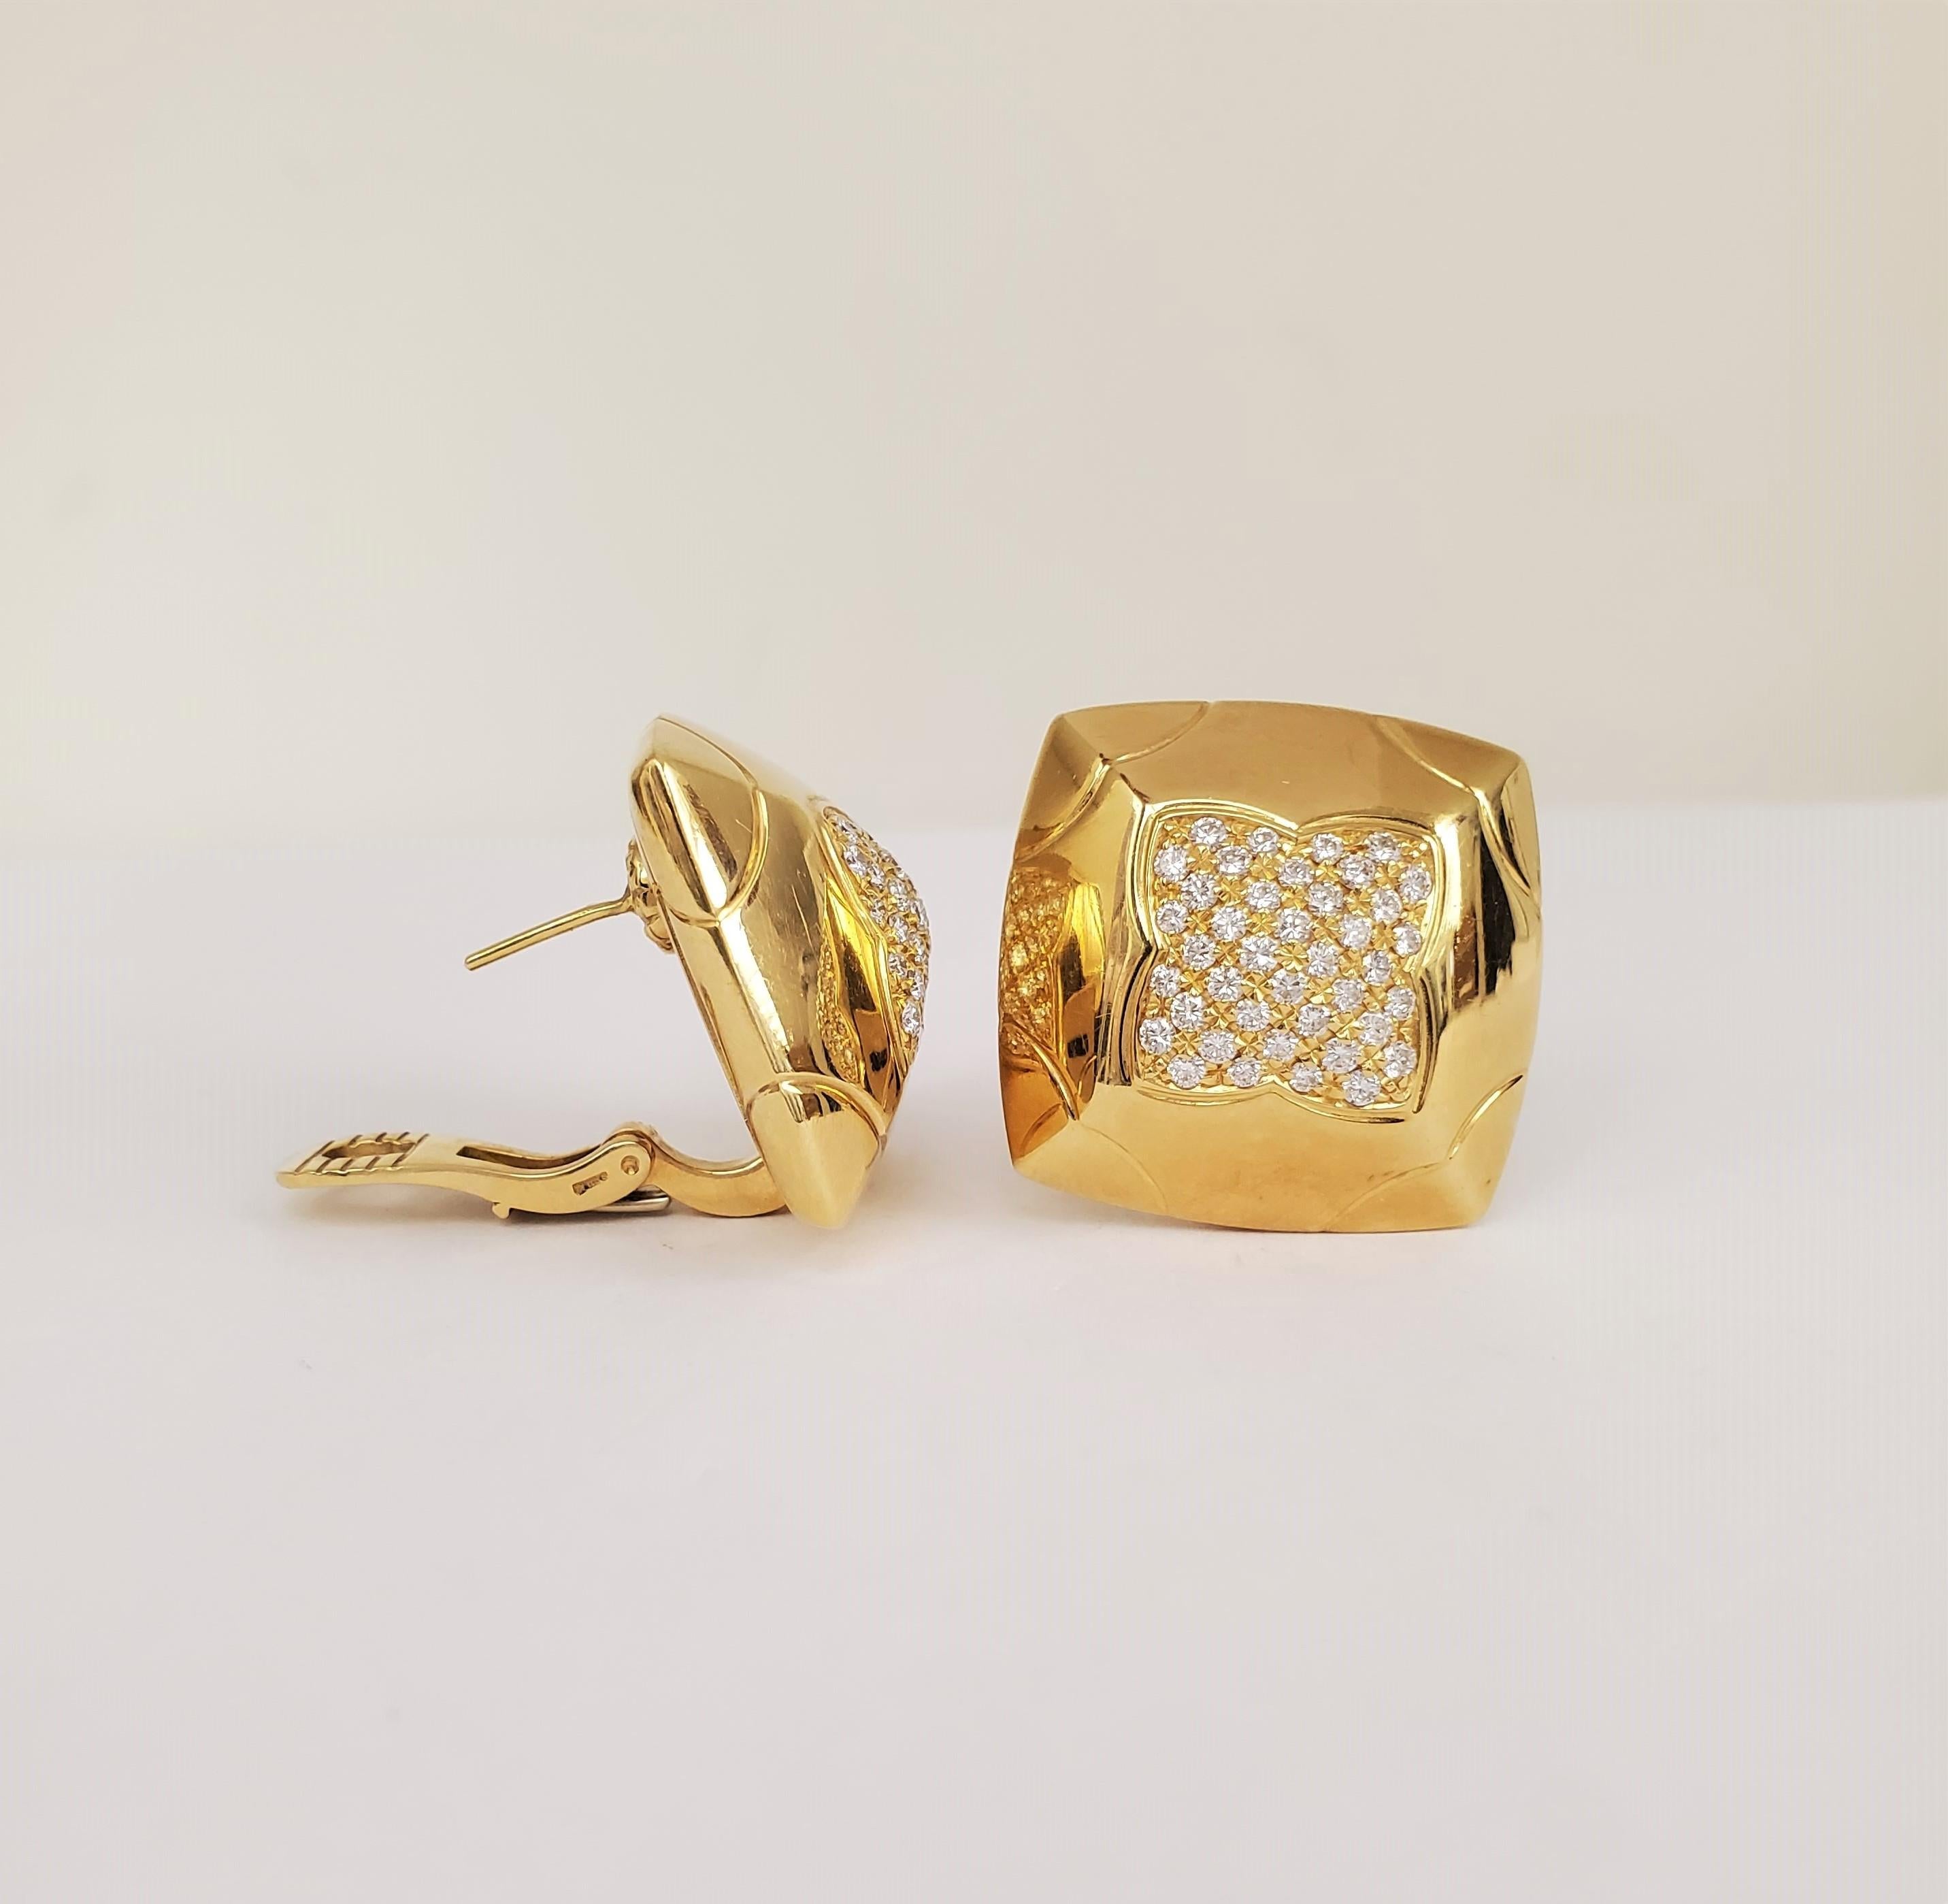 Authentic Bulgari Pyramide earrings crafted in 18 karat yellow gold with approximately 80 diamonds, weighing an estimated 1.6 cttw.  Earrings measure 1 inch x 1 inch.  Signed Bulgari, 750.  CIRCA 2000s